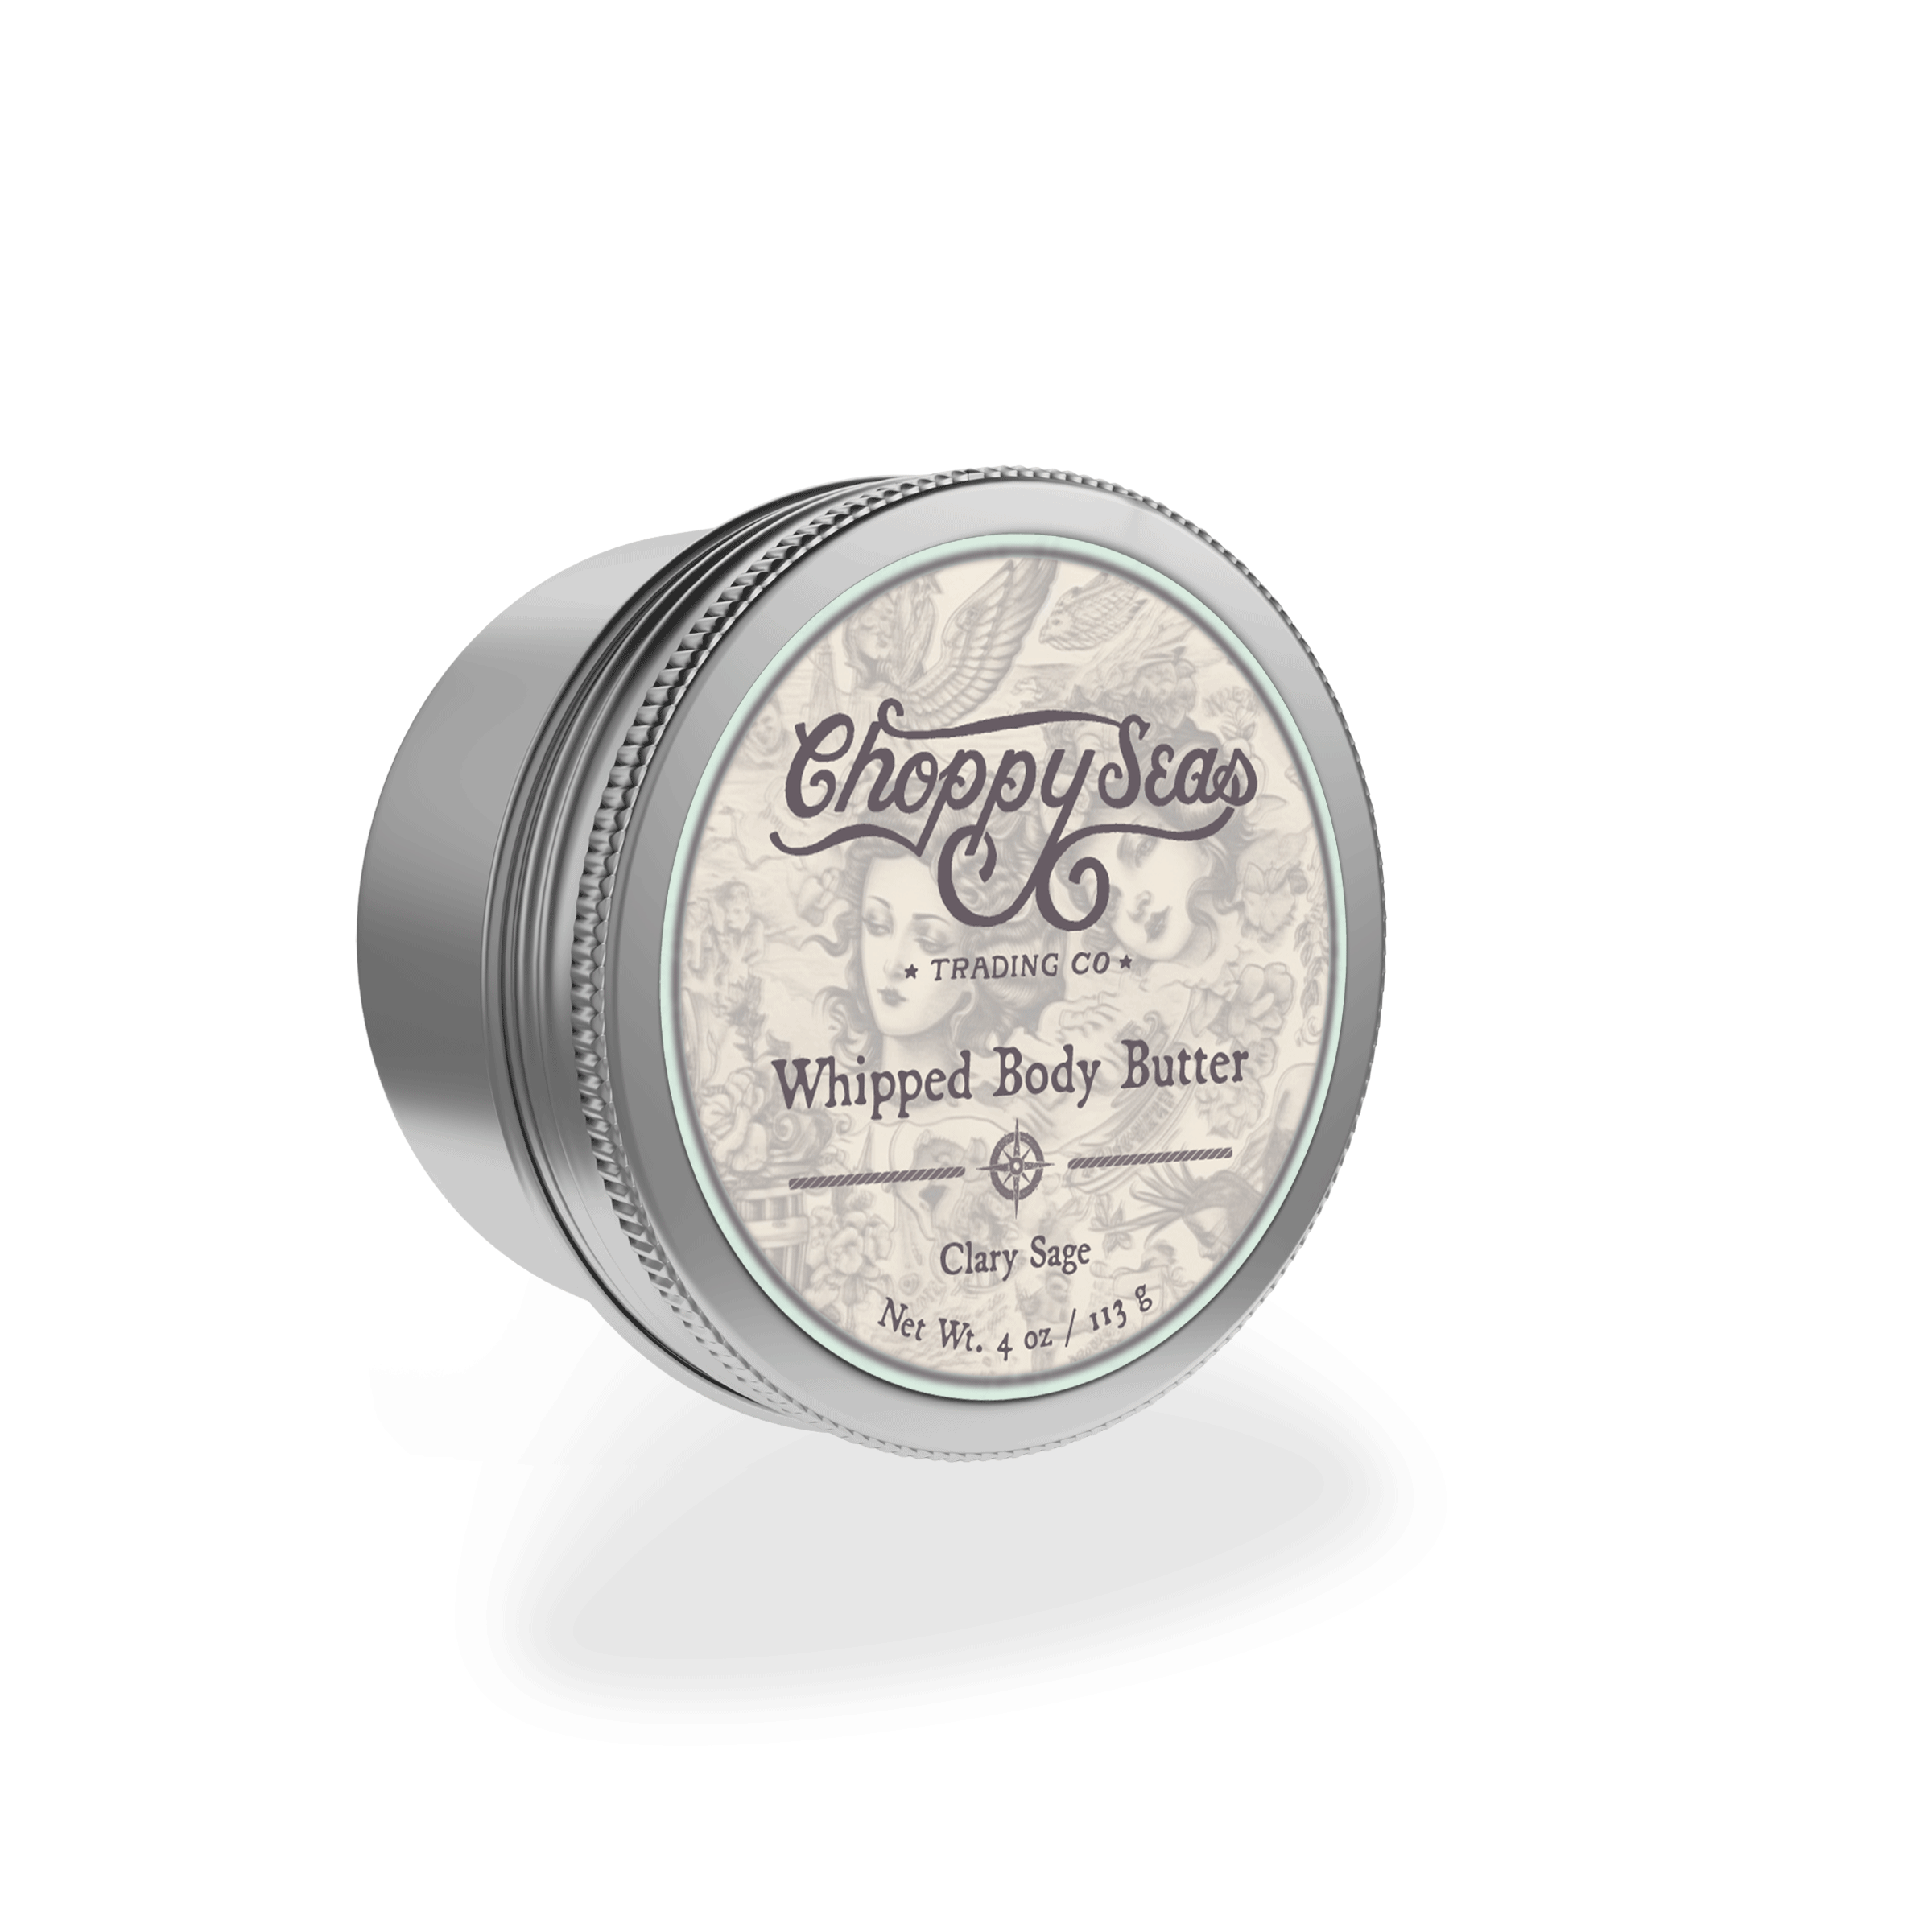 Clary Sage Whipped Body Butter